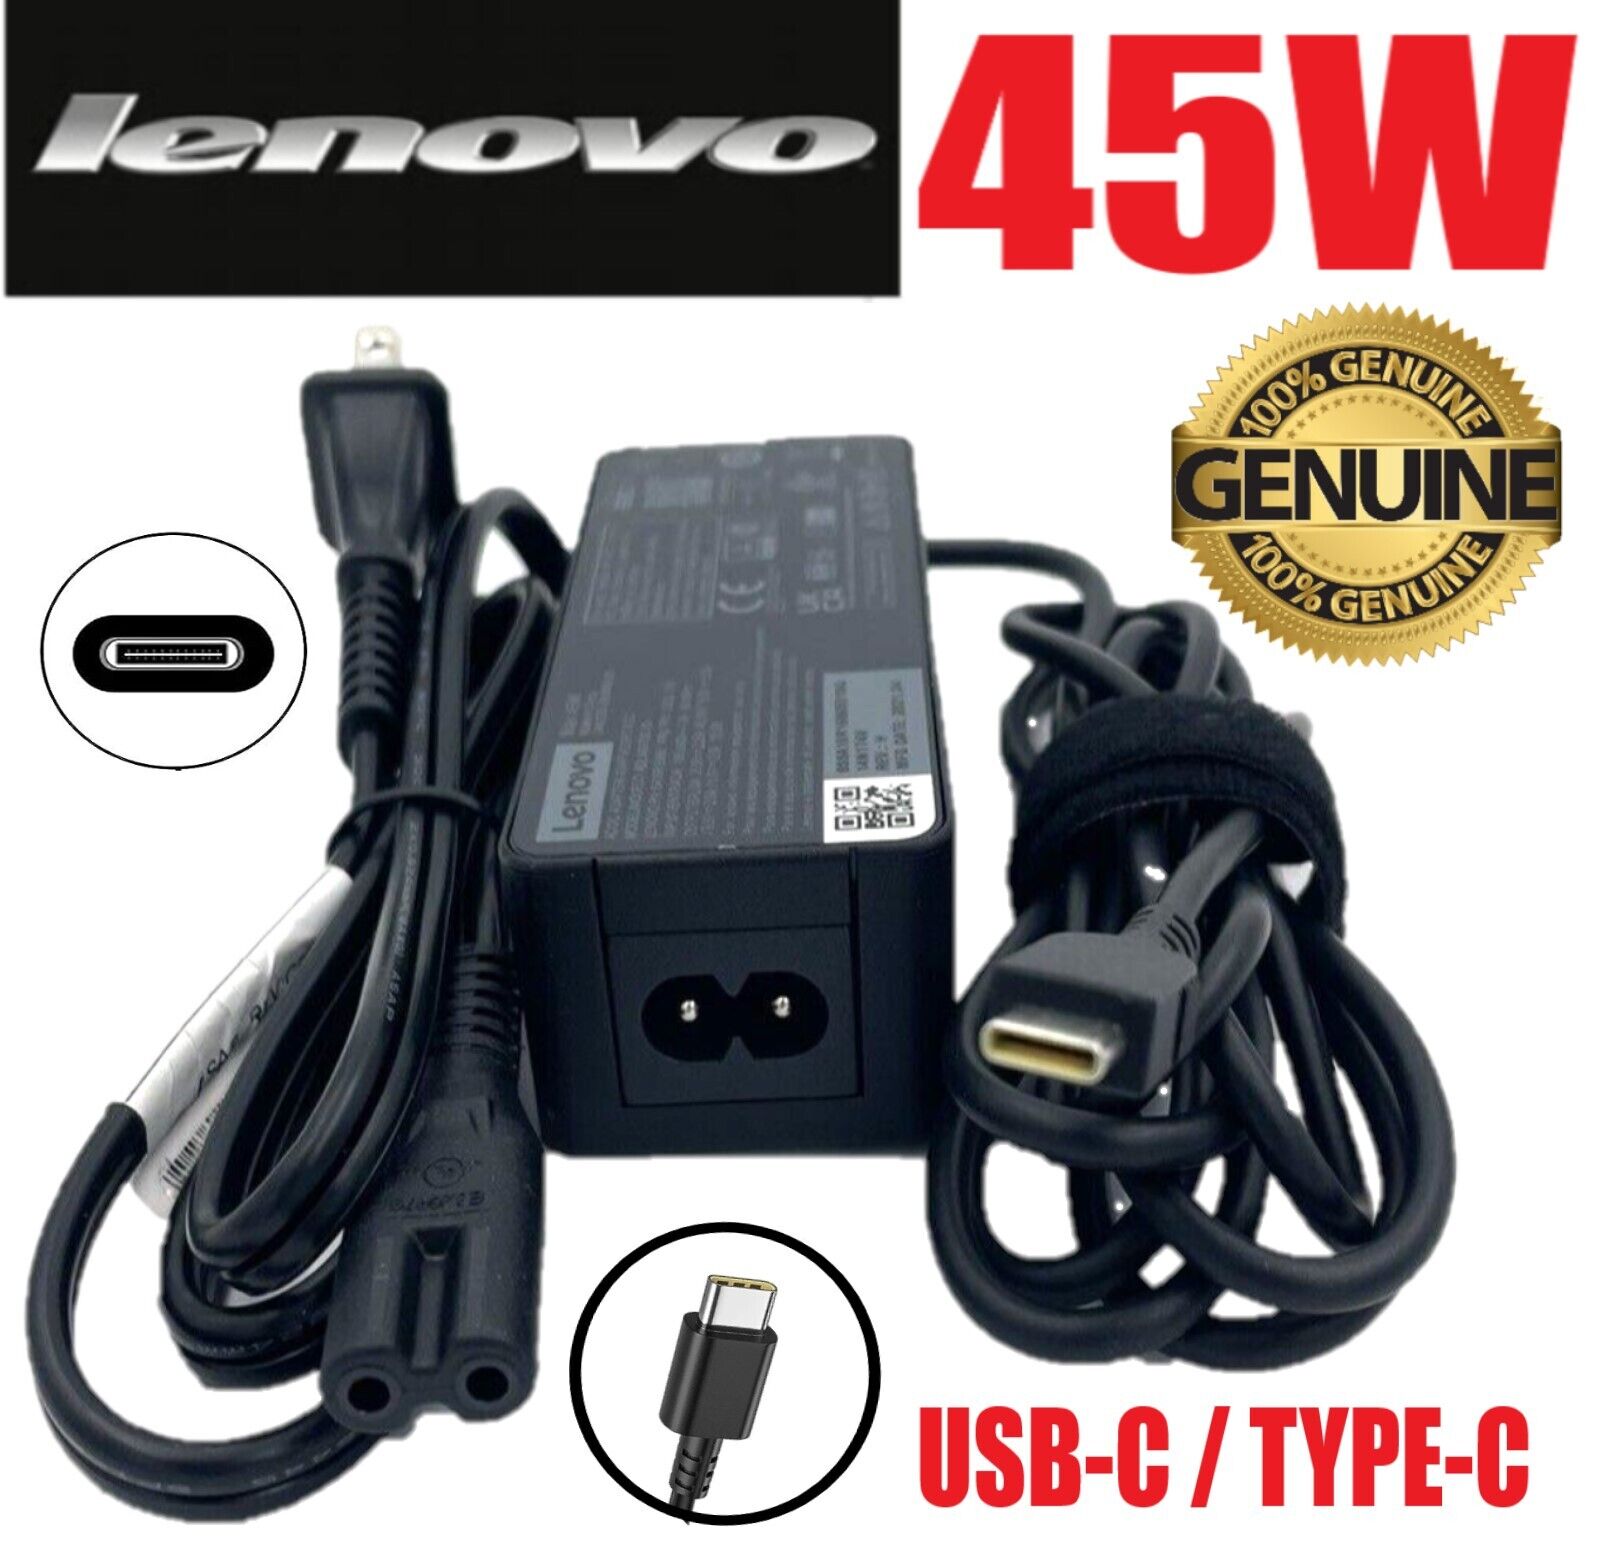 LOT OEM Lenovo 45W USB-C Type-C HP Chromebook Acer Asus Samsung Adapter Charger